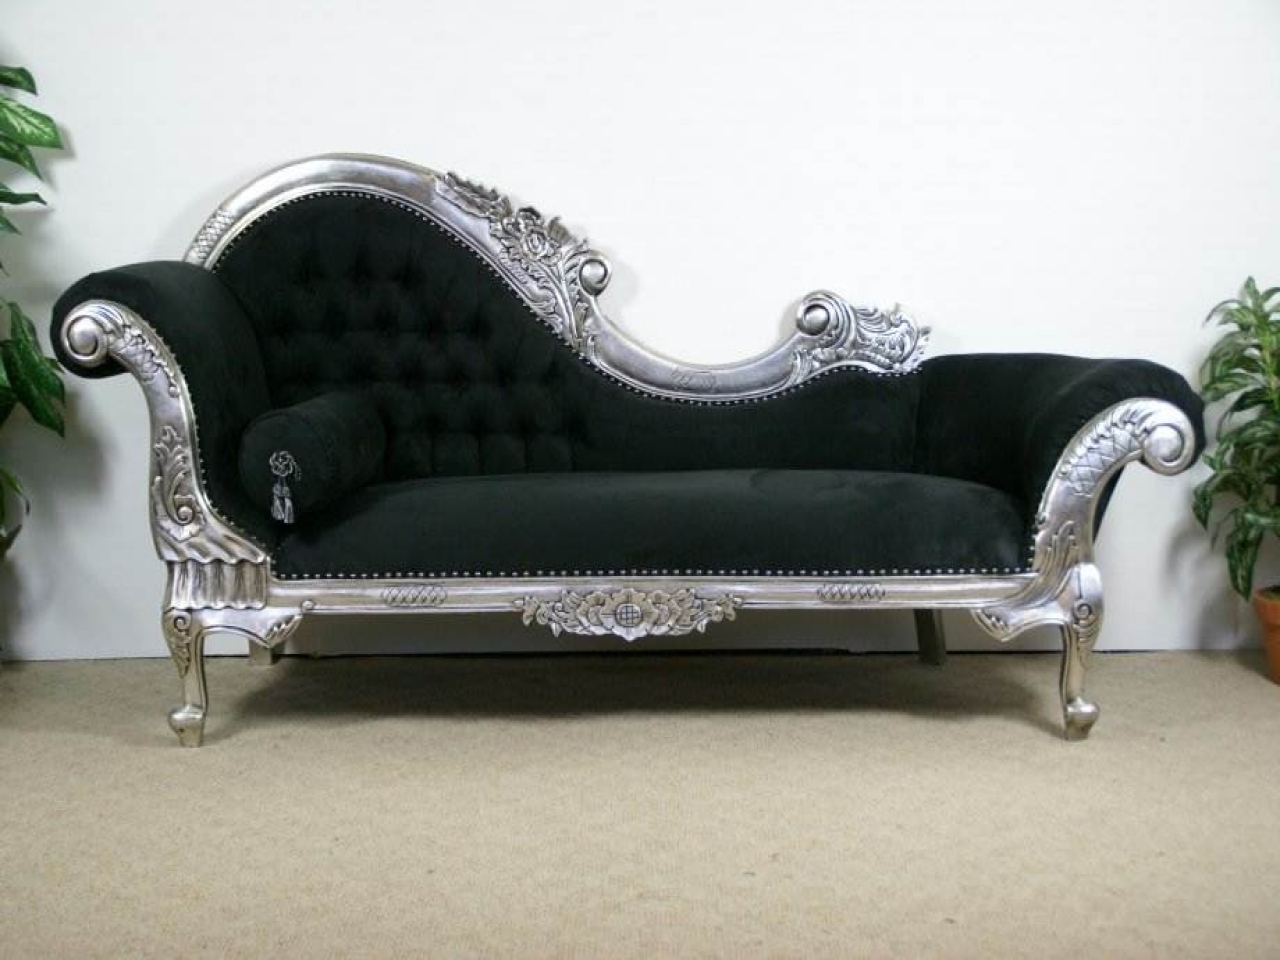 Soft Victorian Decor Living Room With Chaise Lounge